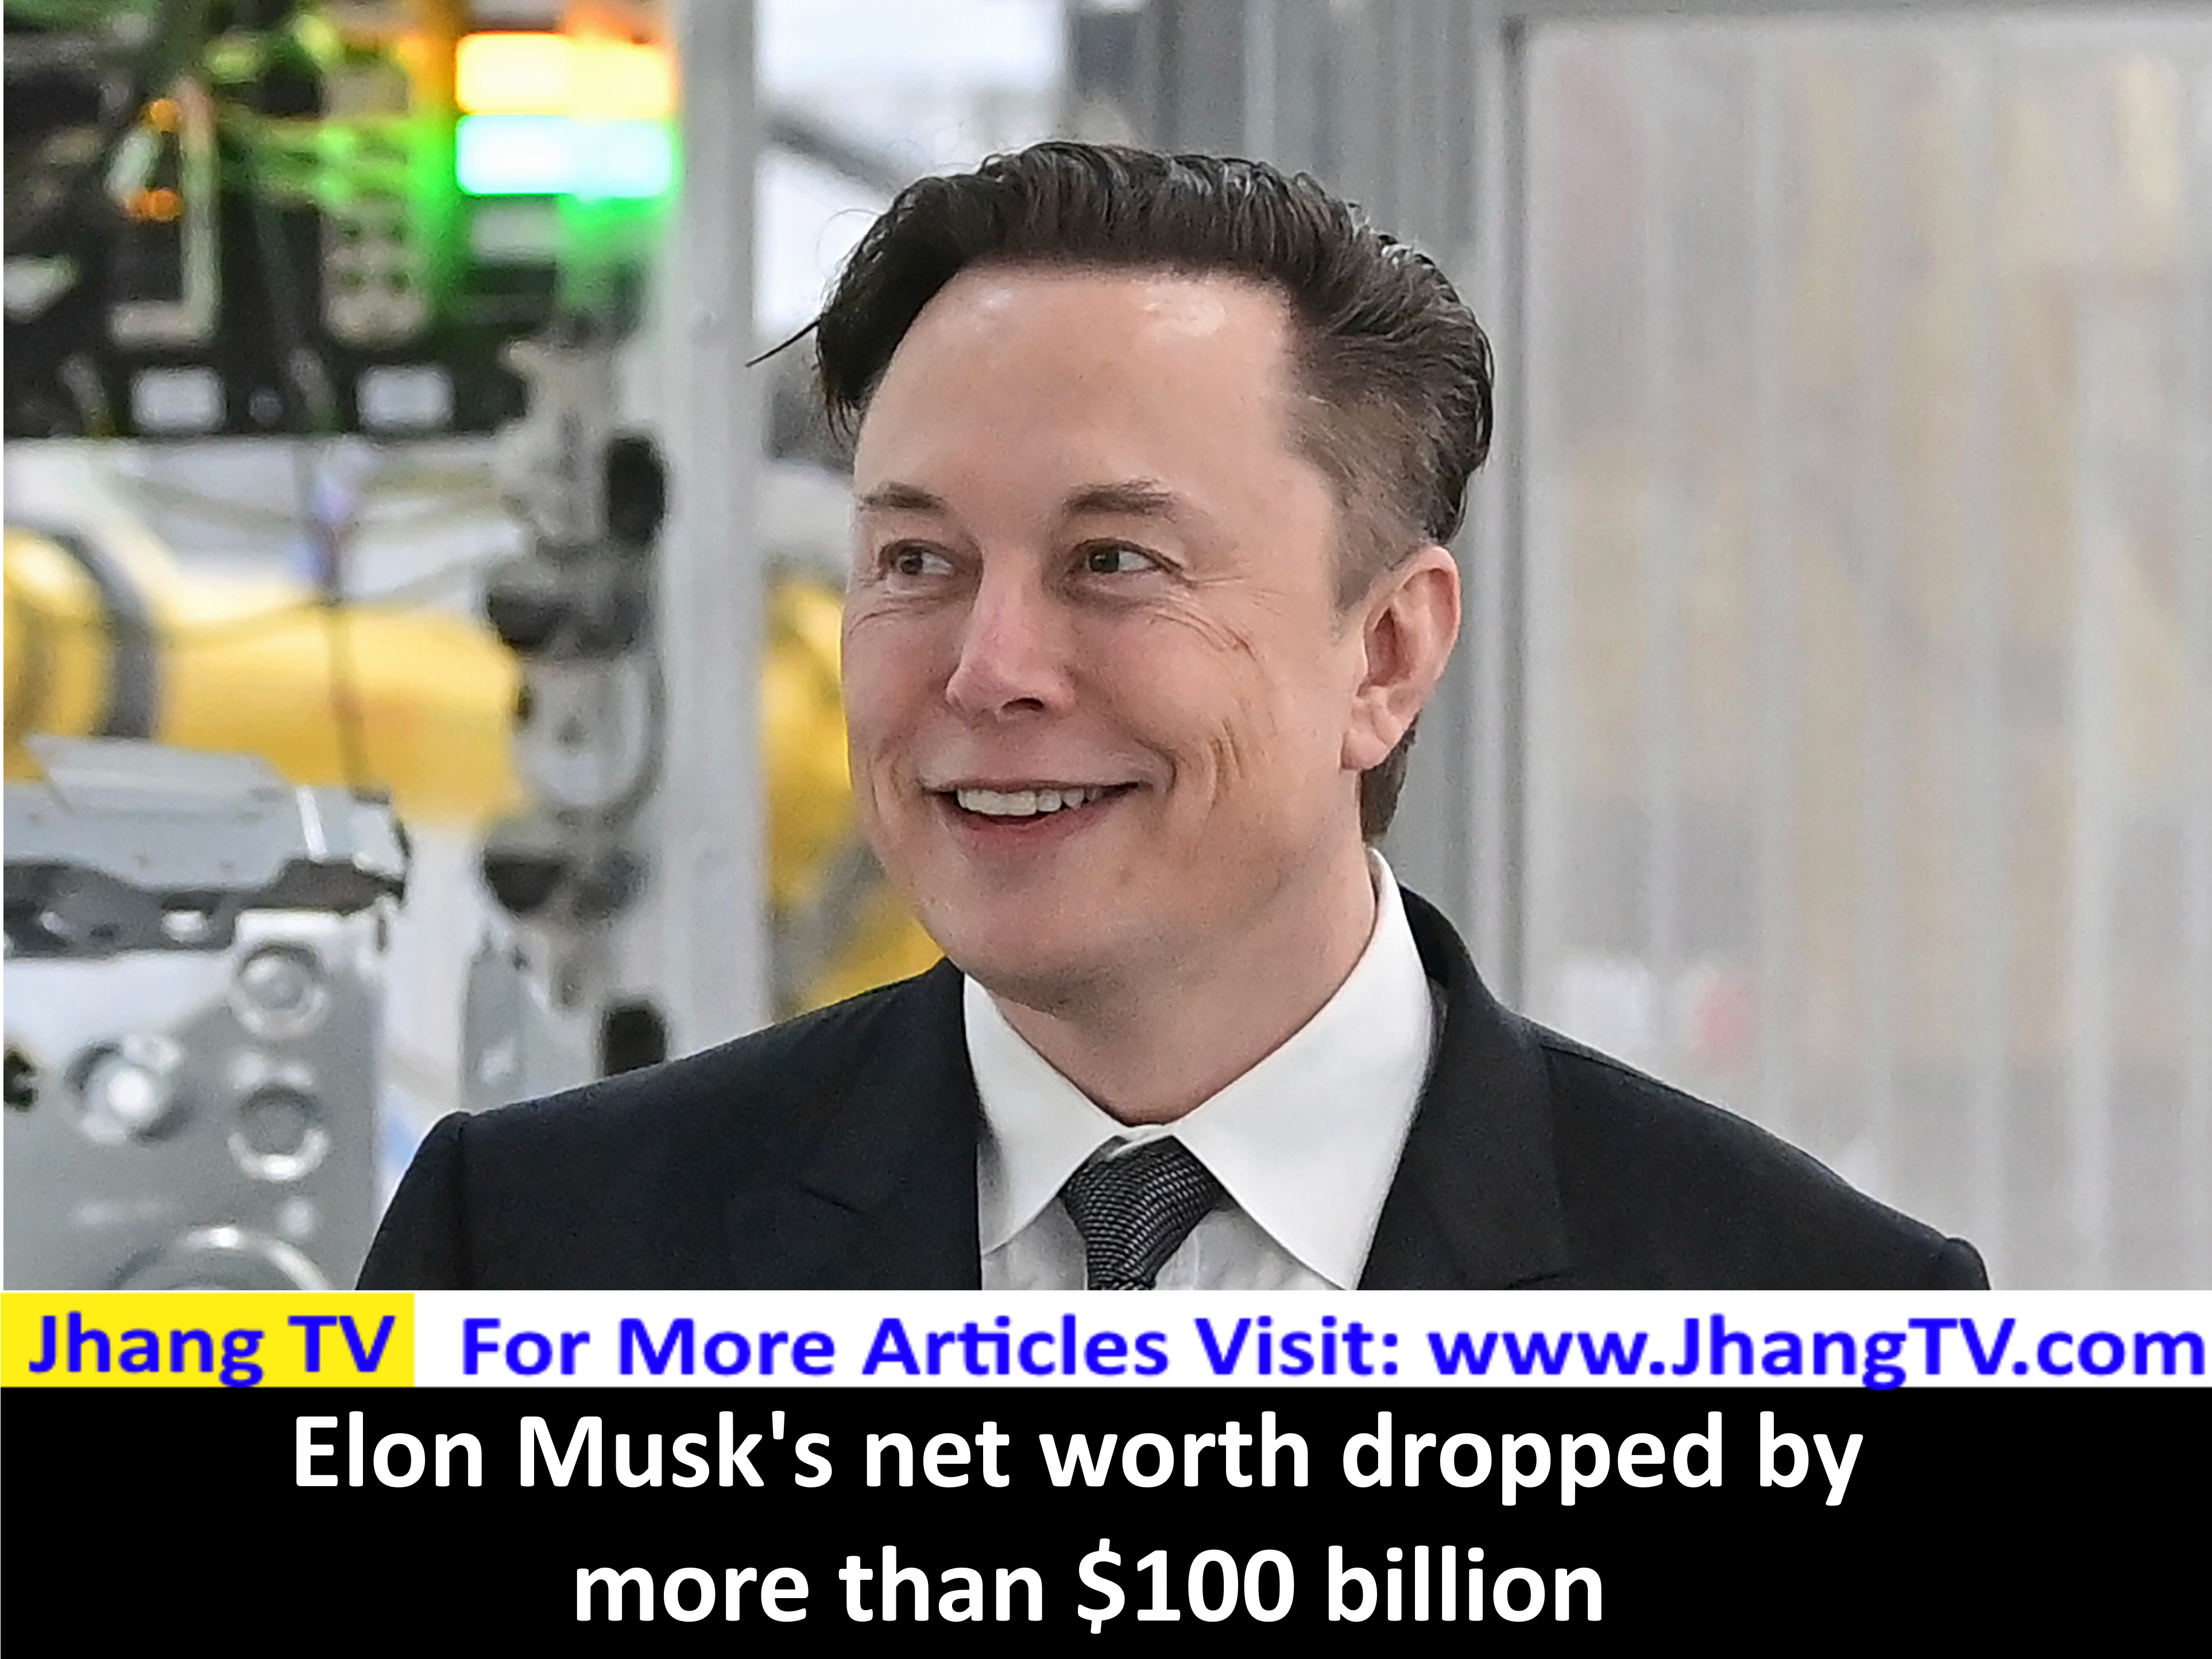 Elon Musk's net worth dropped by more than $100 billion